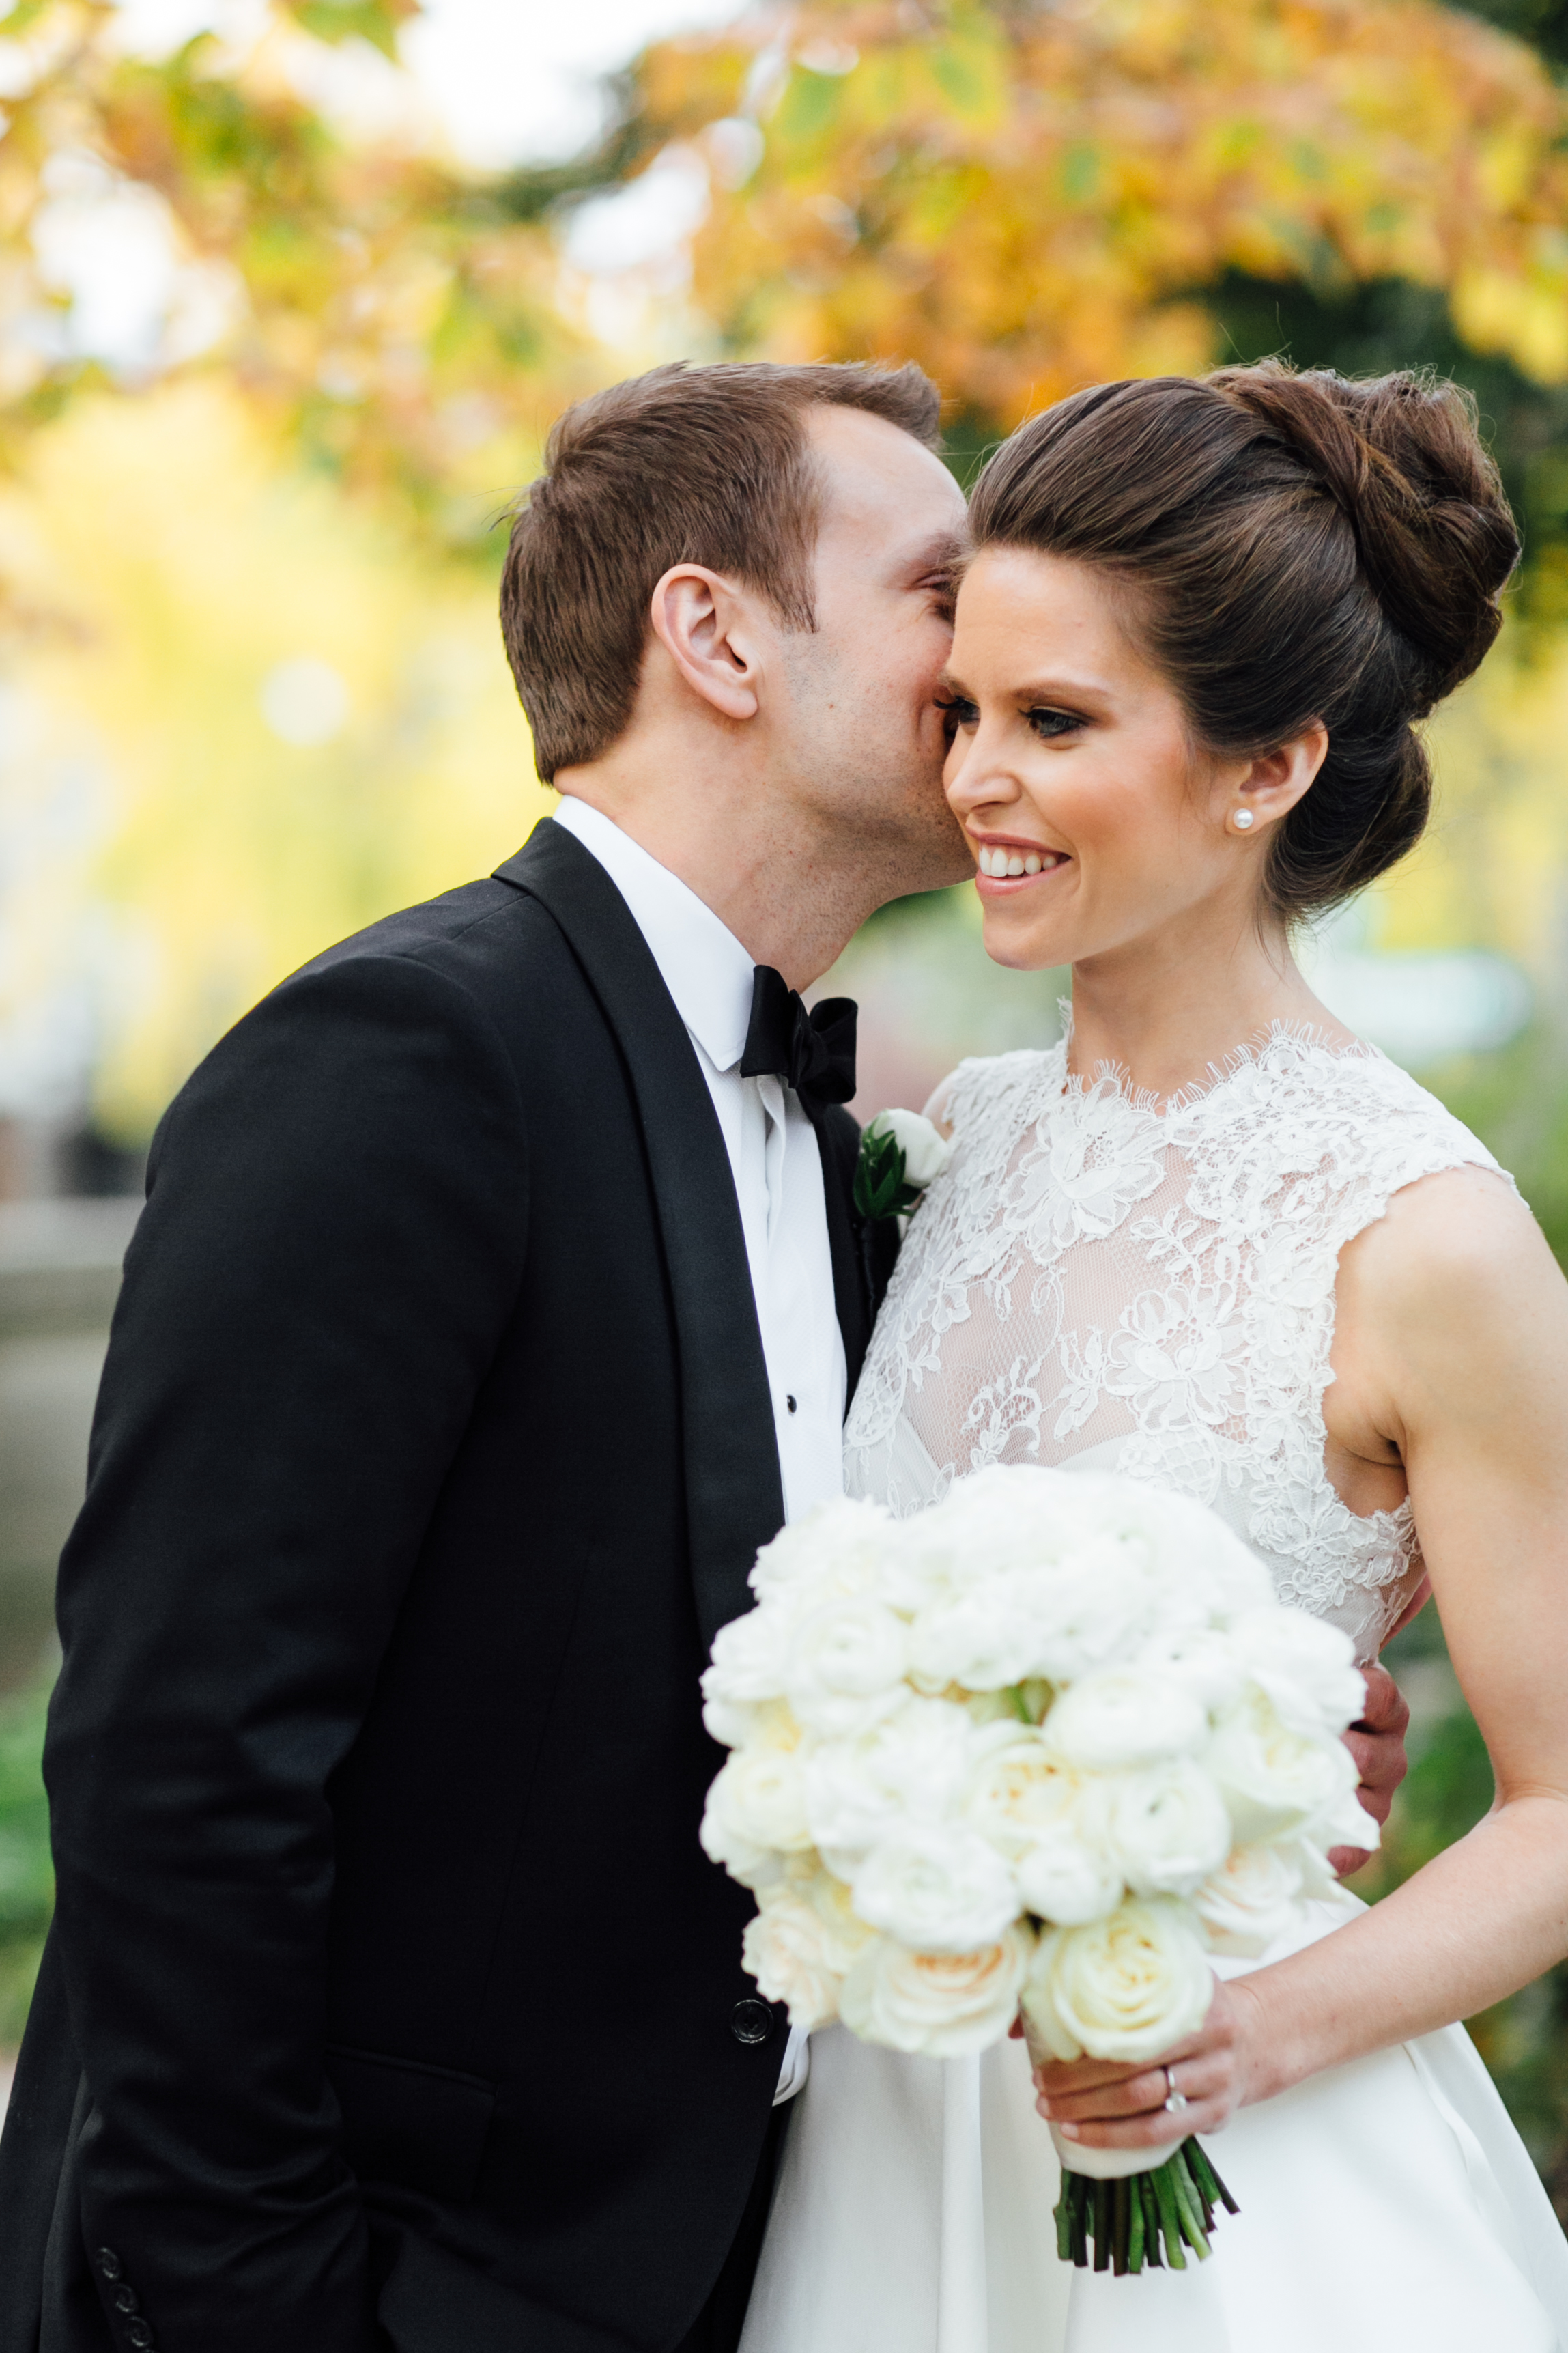 Groom kissing bride at Meridian House in DC - Maria Vicencio Photography Weddings